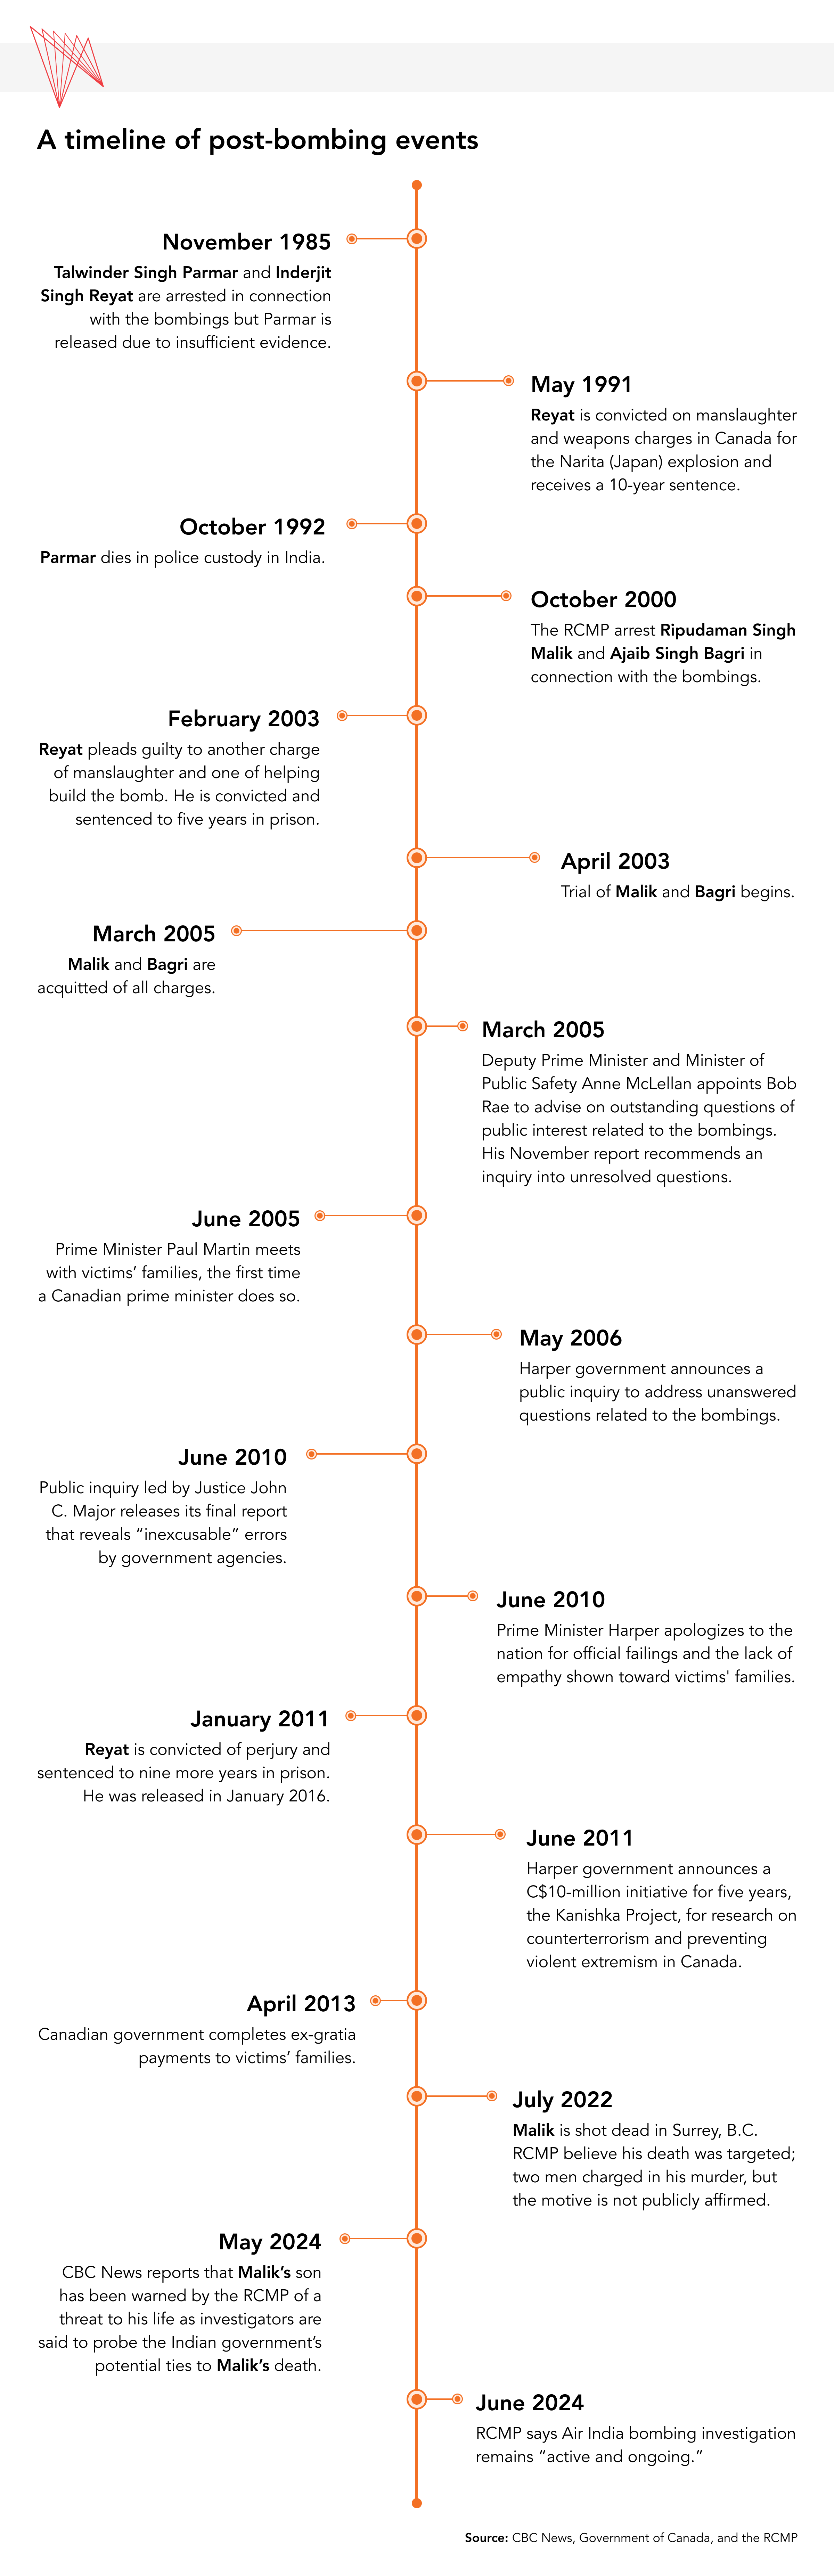 A timeline of post-Air India Bombing events